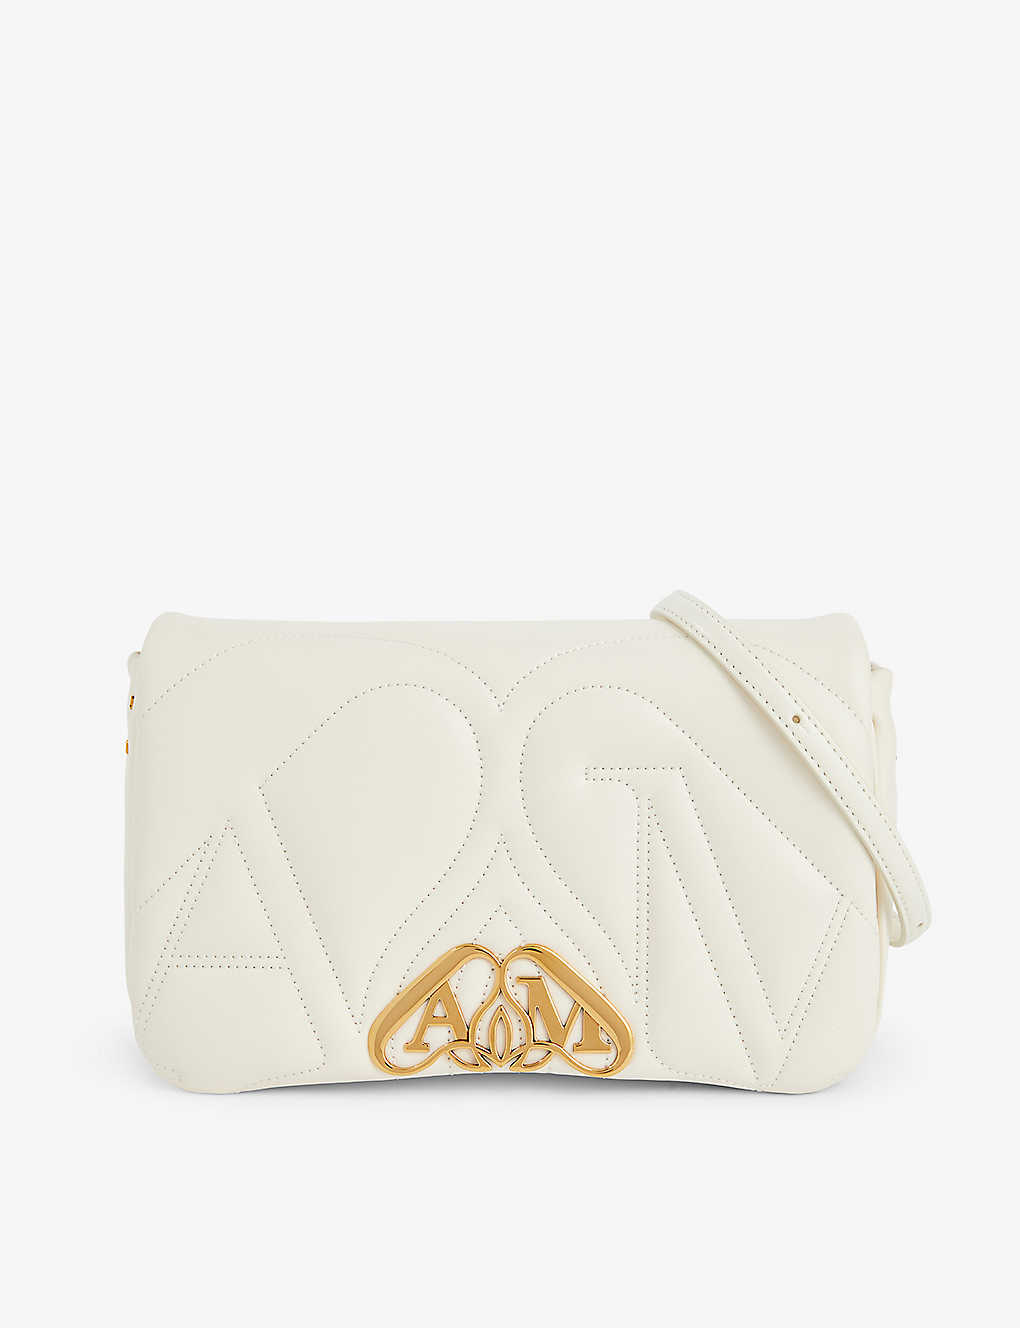 Alexander Mcqueen Womens Soft Ivory The Seal Small Leather Shoulder Bag